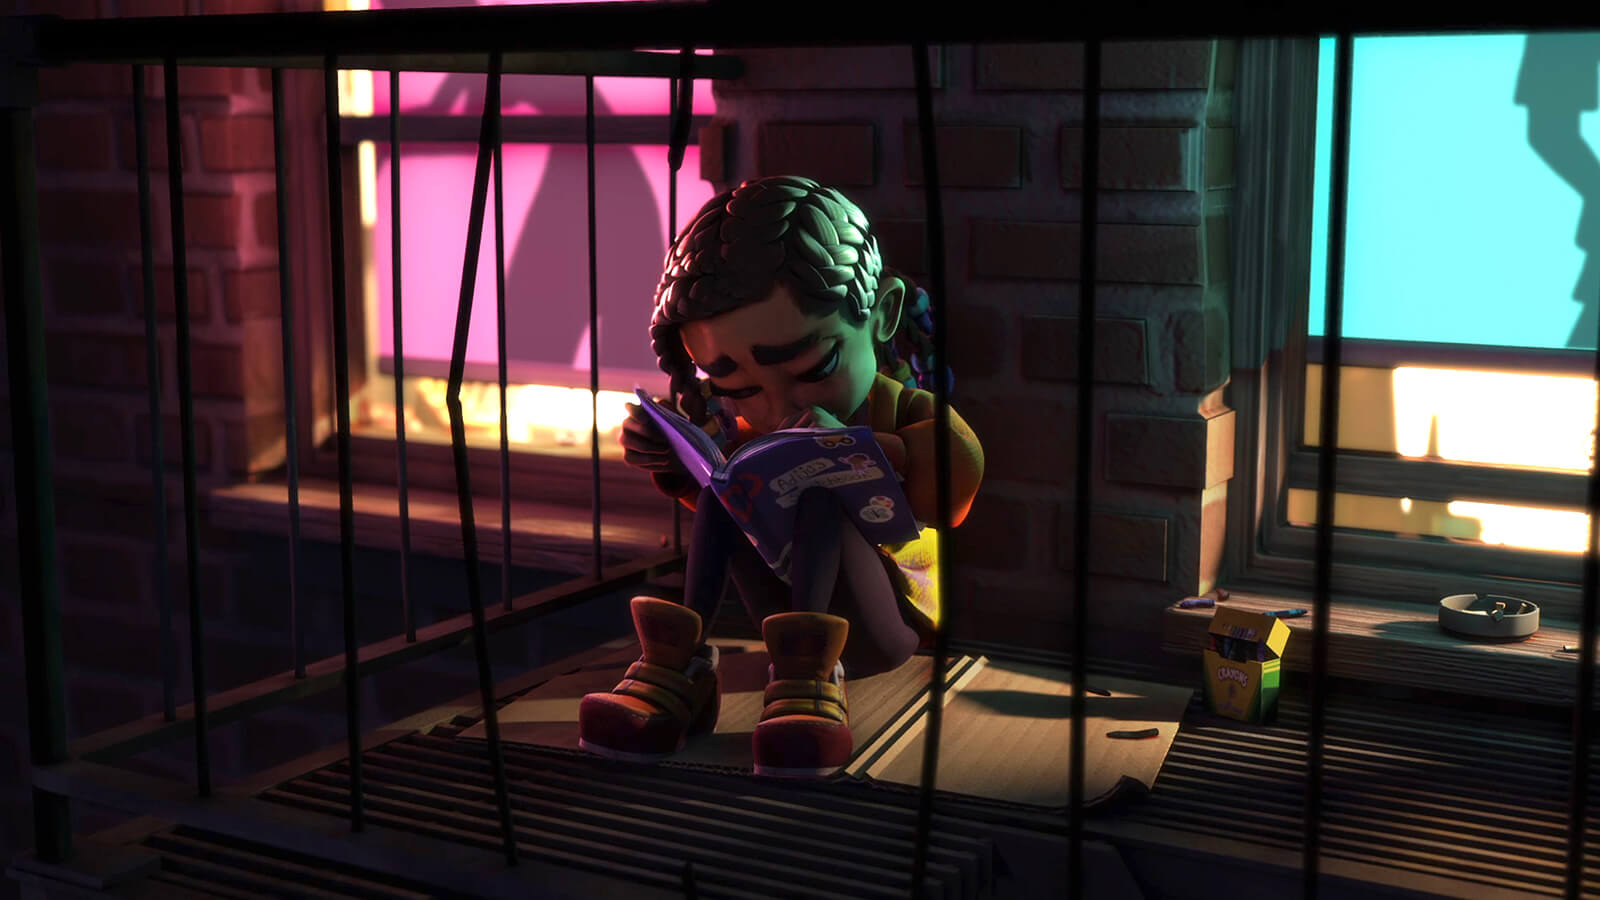 Closeup of a young girl sadly sitting on a fire escape, coloring in a book, and lit from the apartment behind her